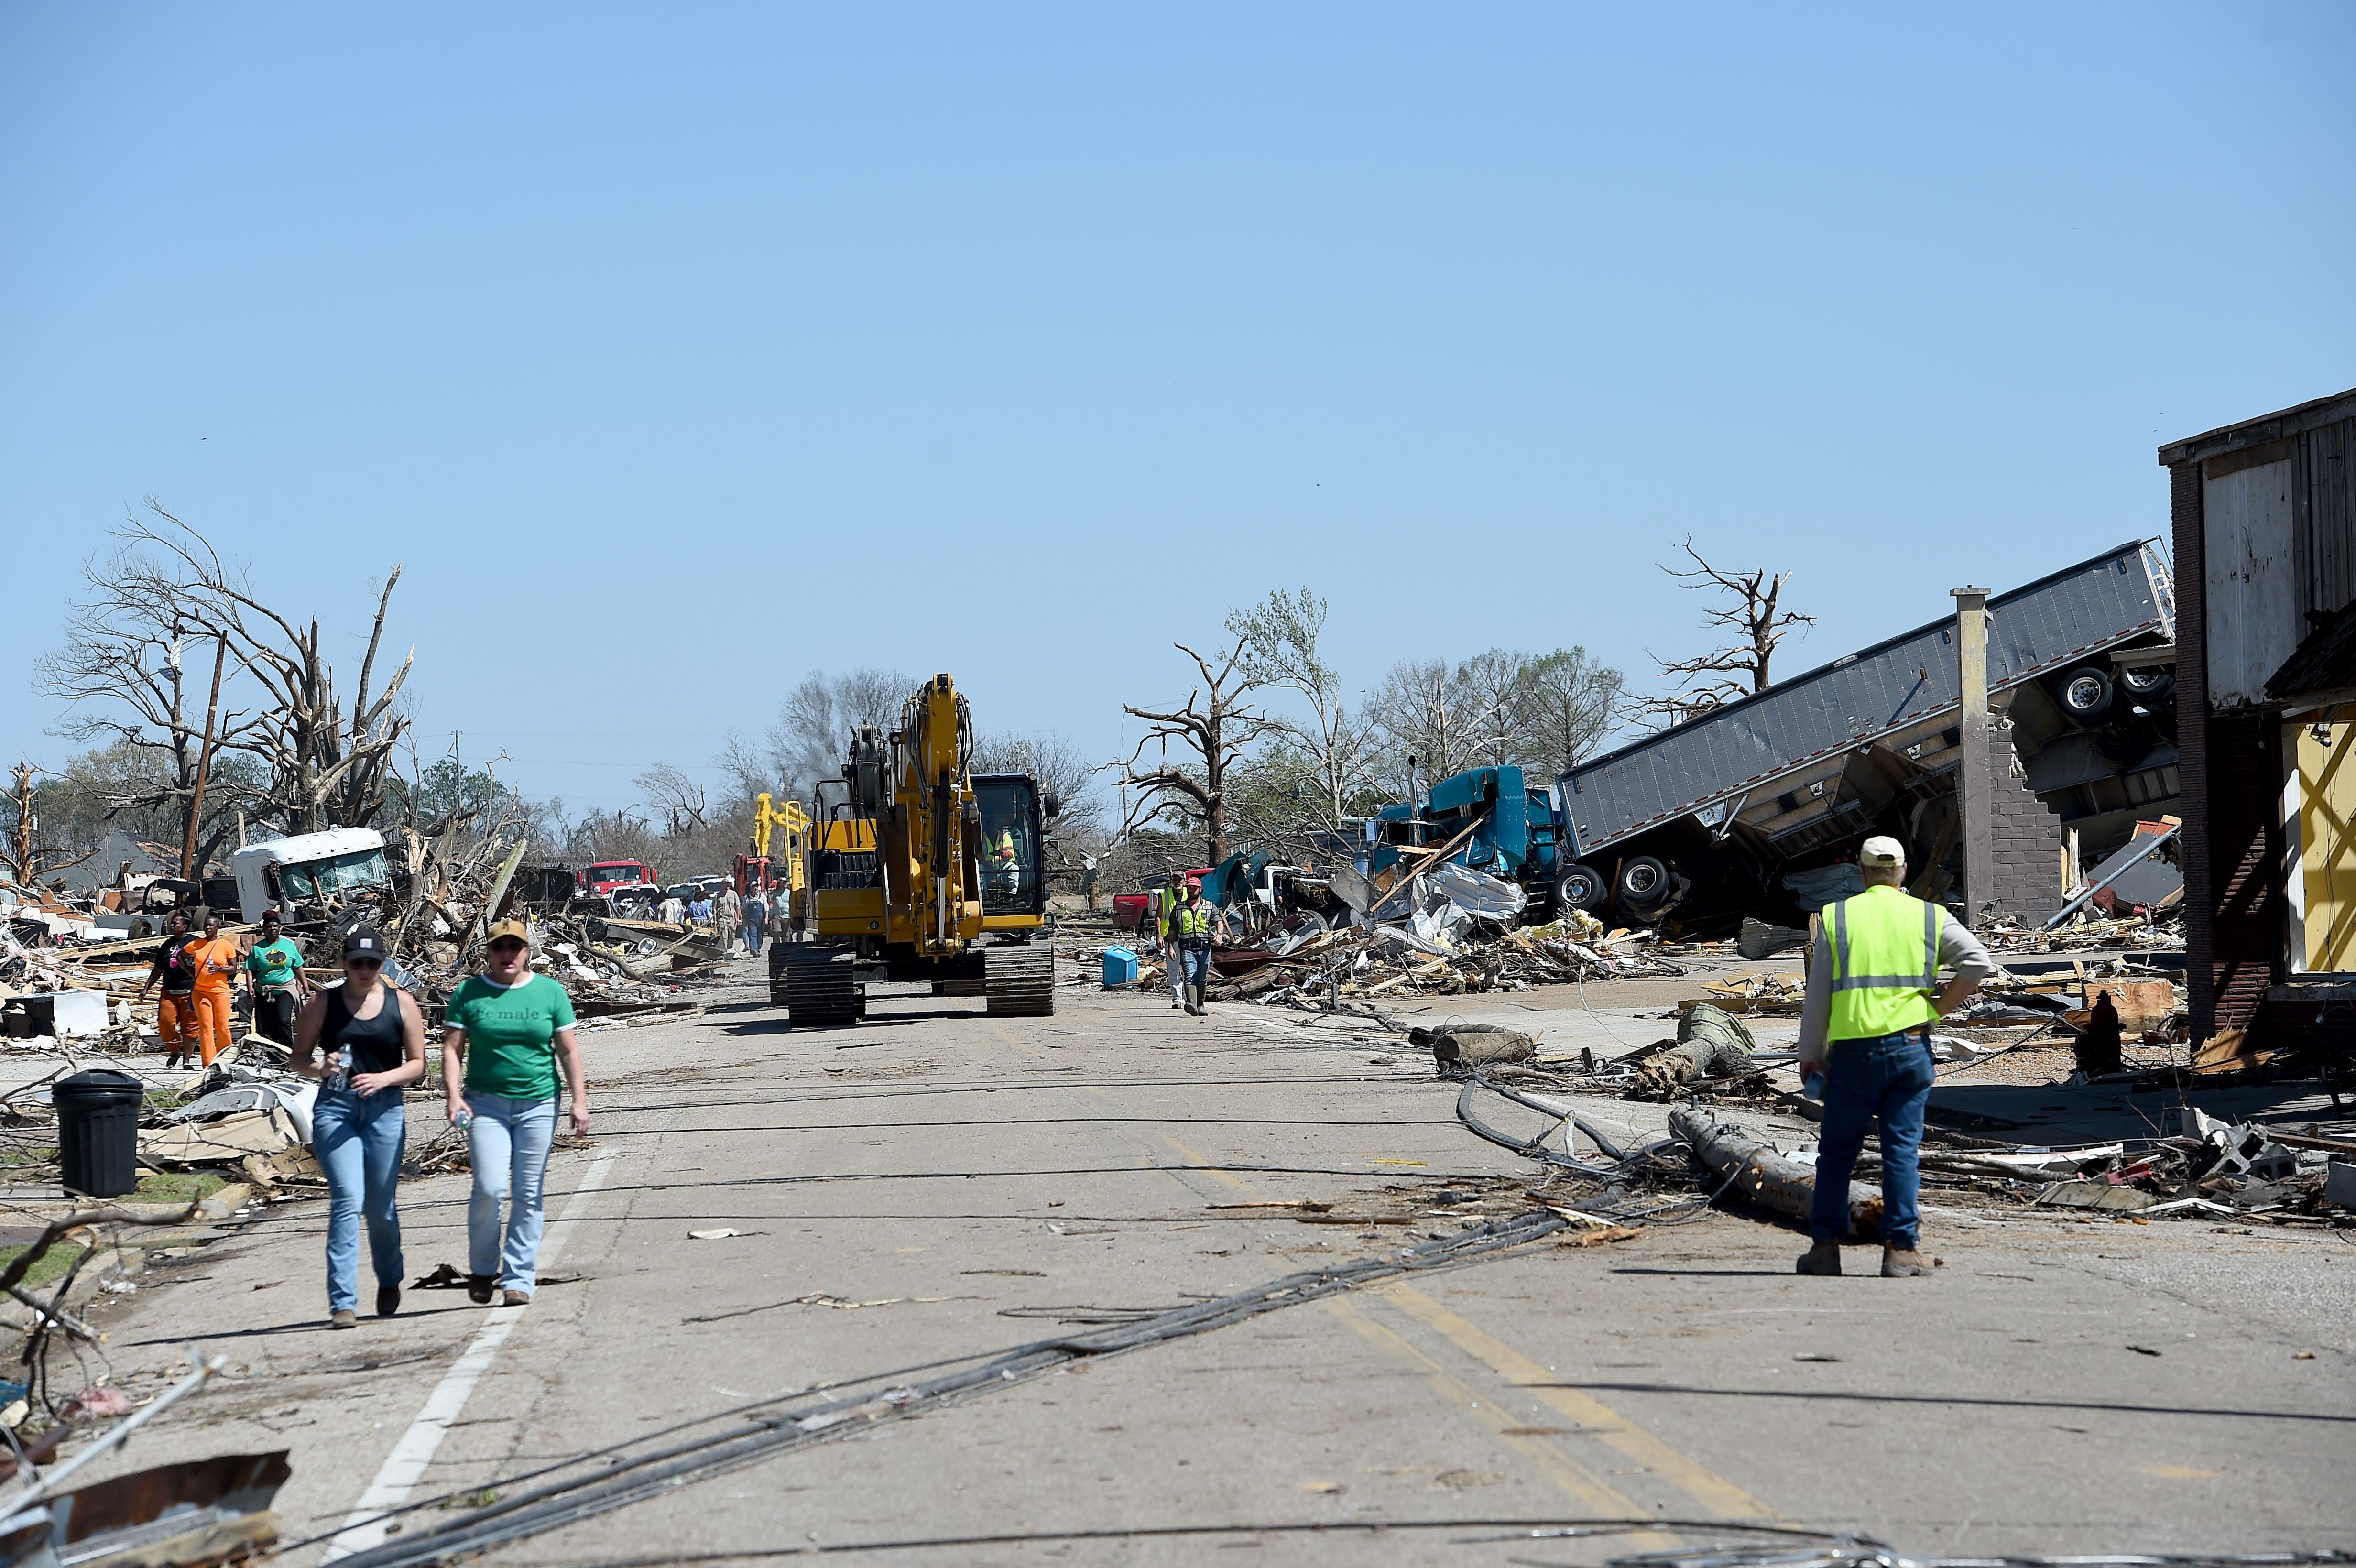 Tornado damage to infrastructure and people walking.